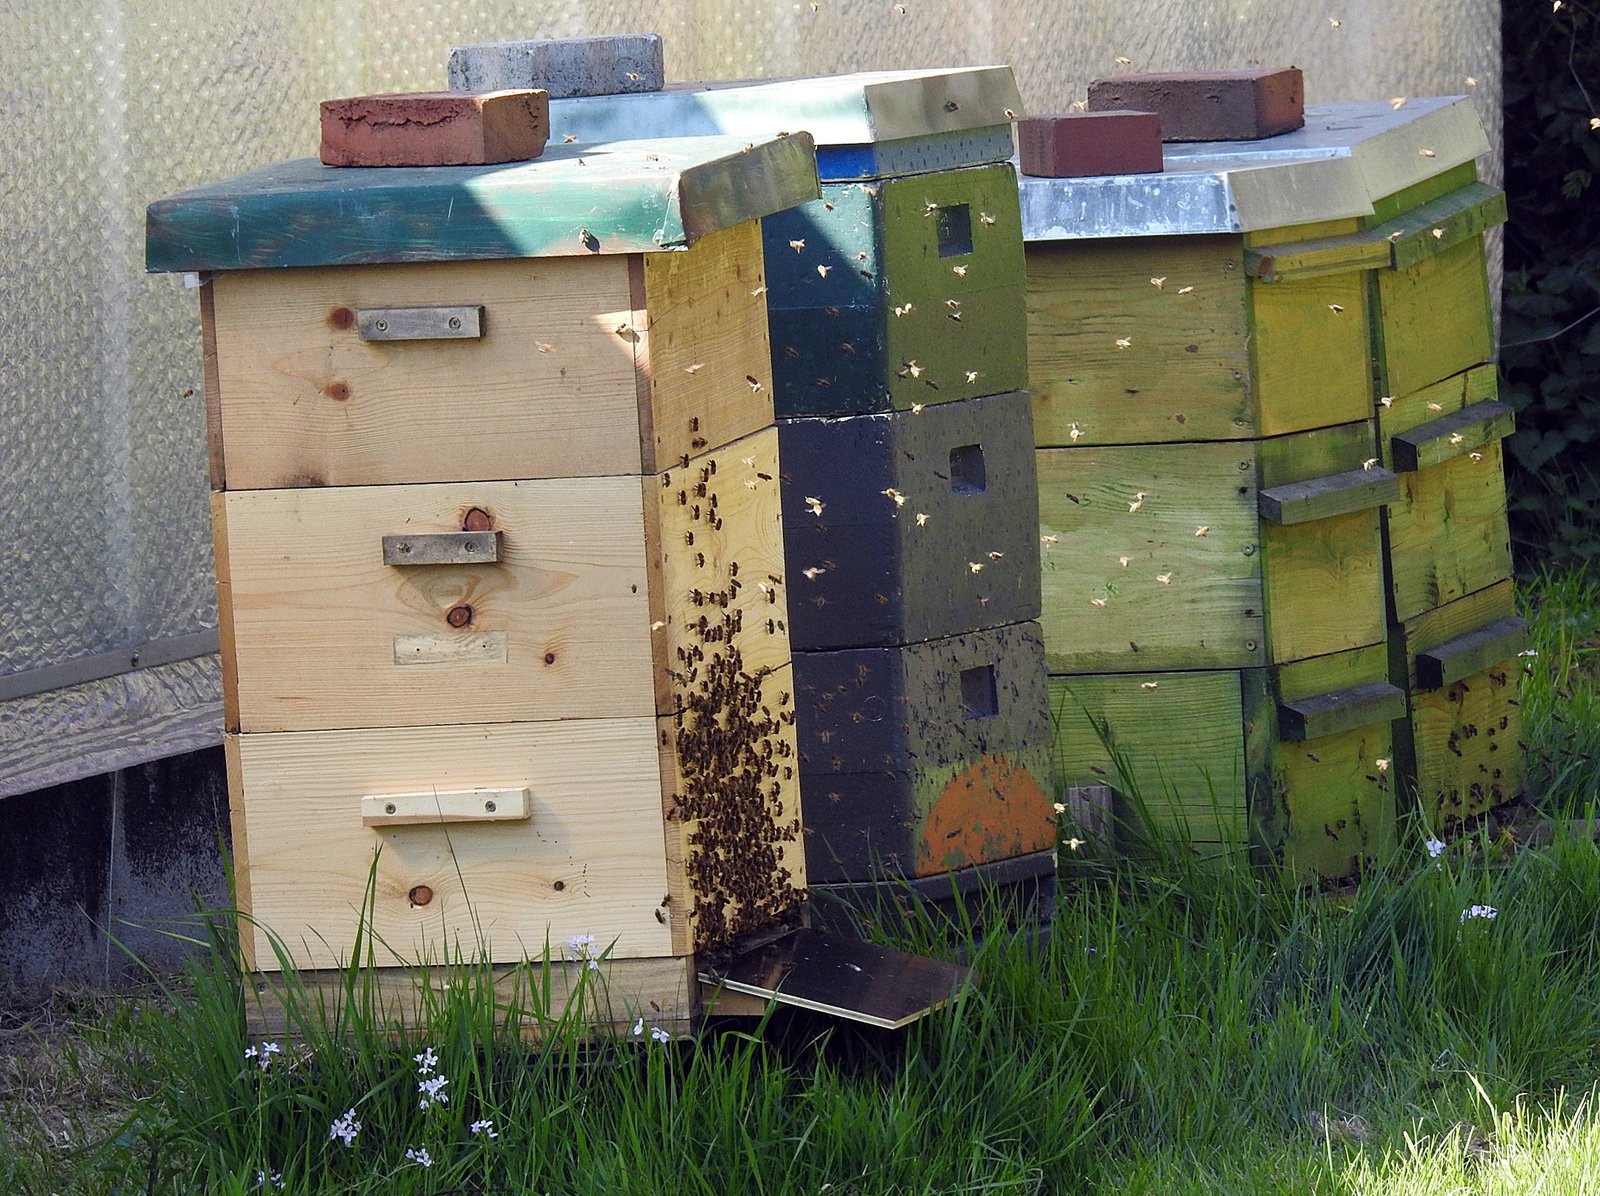 The Importance of Hive Storage: Where to Keep Your Gear